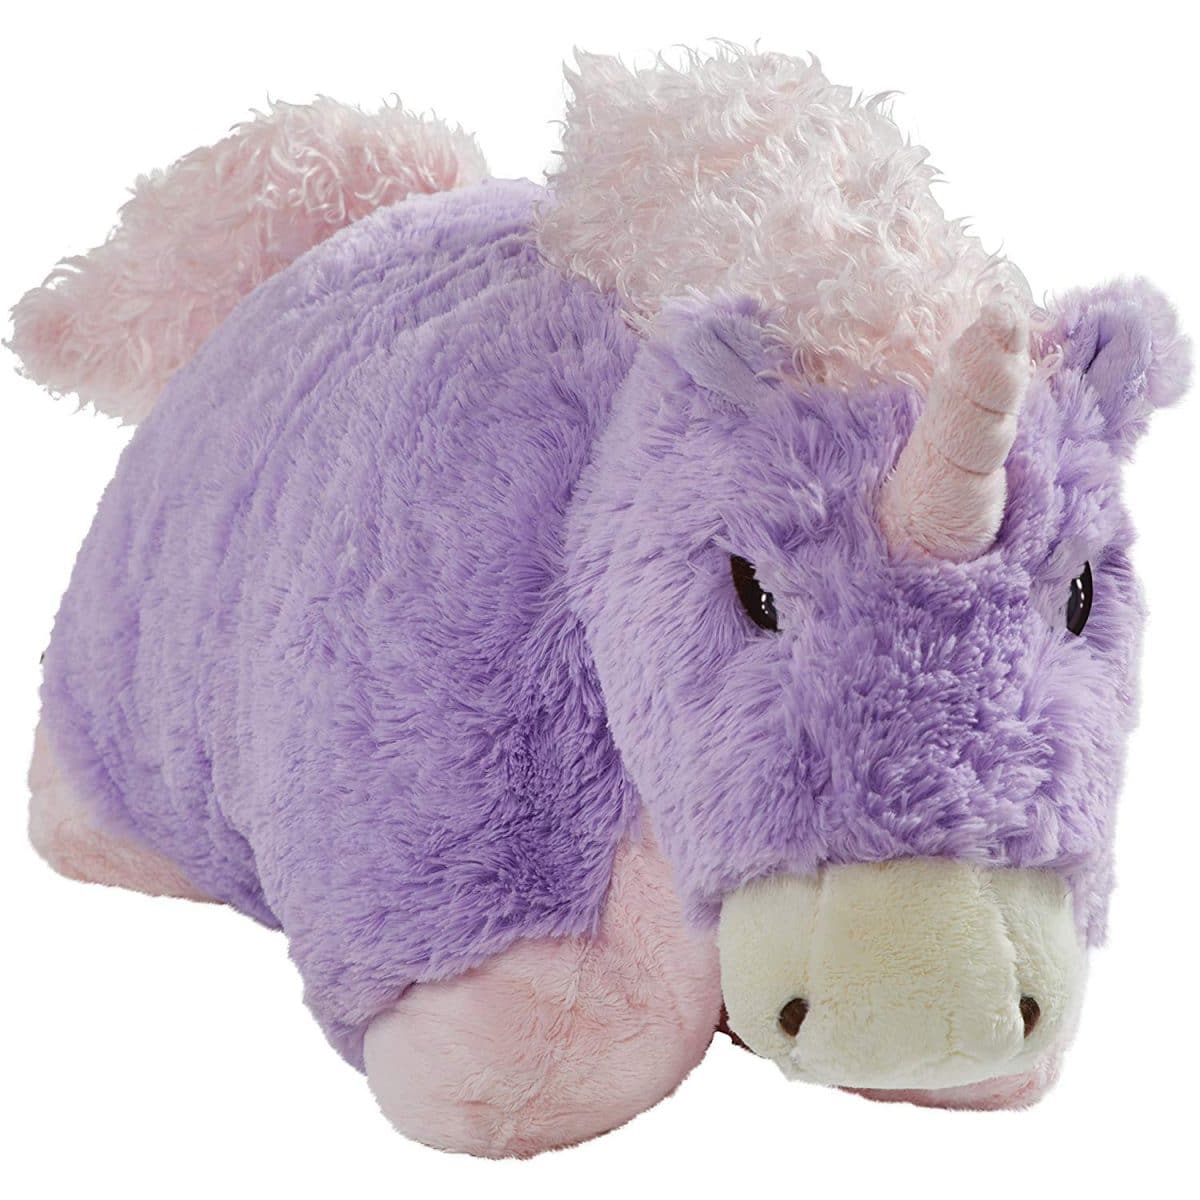 Magical Walking Moving Light Up Colour Changing Realistic Sounds Plush Unicorn